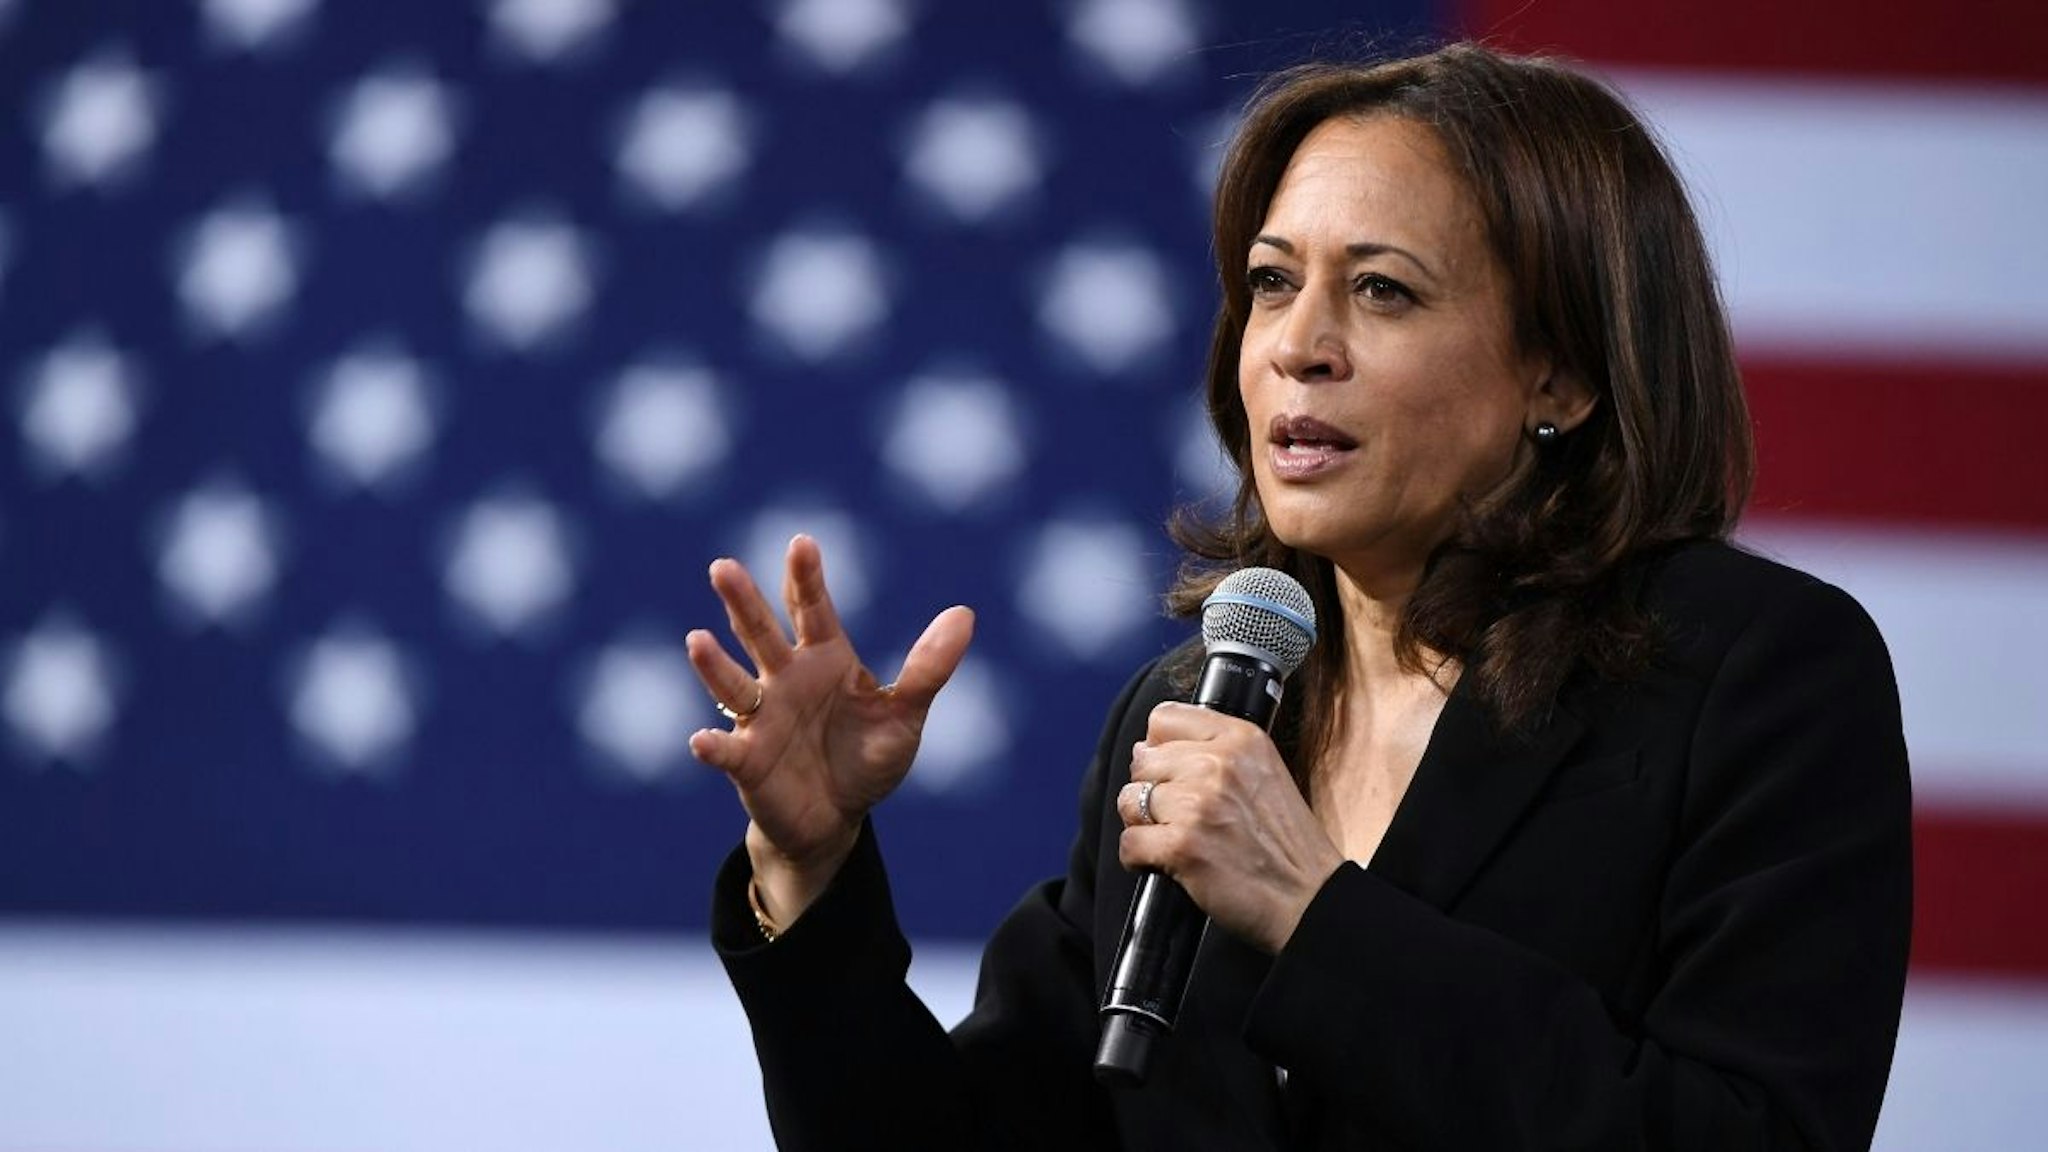 Democratic presidential candidate (and future US Vice President) US Senator Kamala Harris (D-CA) speaks at the National Forum on Wages and Working People: Creating an Economy That Works for All at Enclave, Las Vegas, Nevada, April 27, 2019.